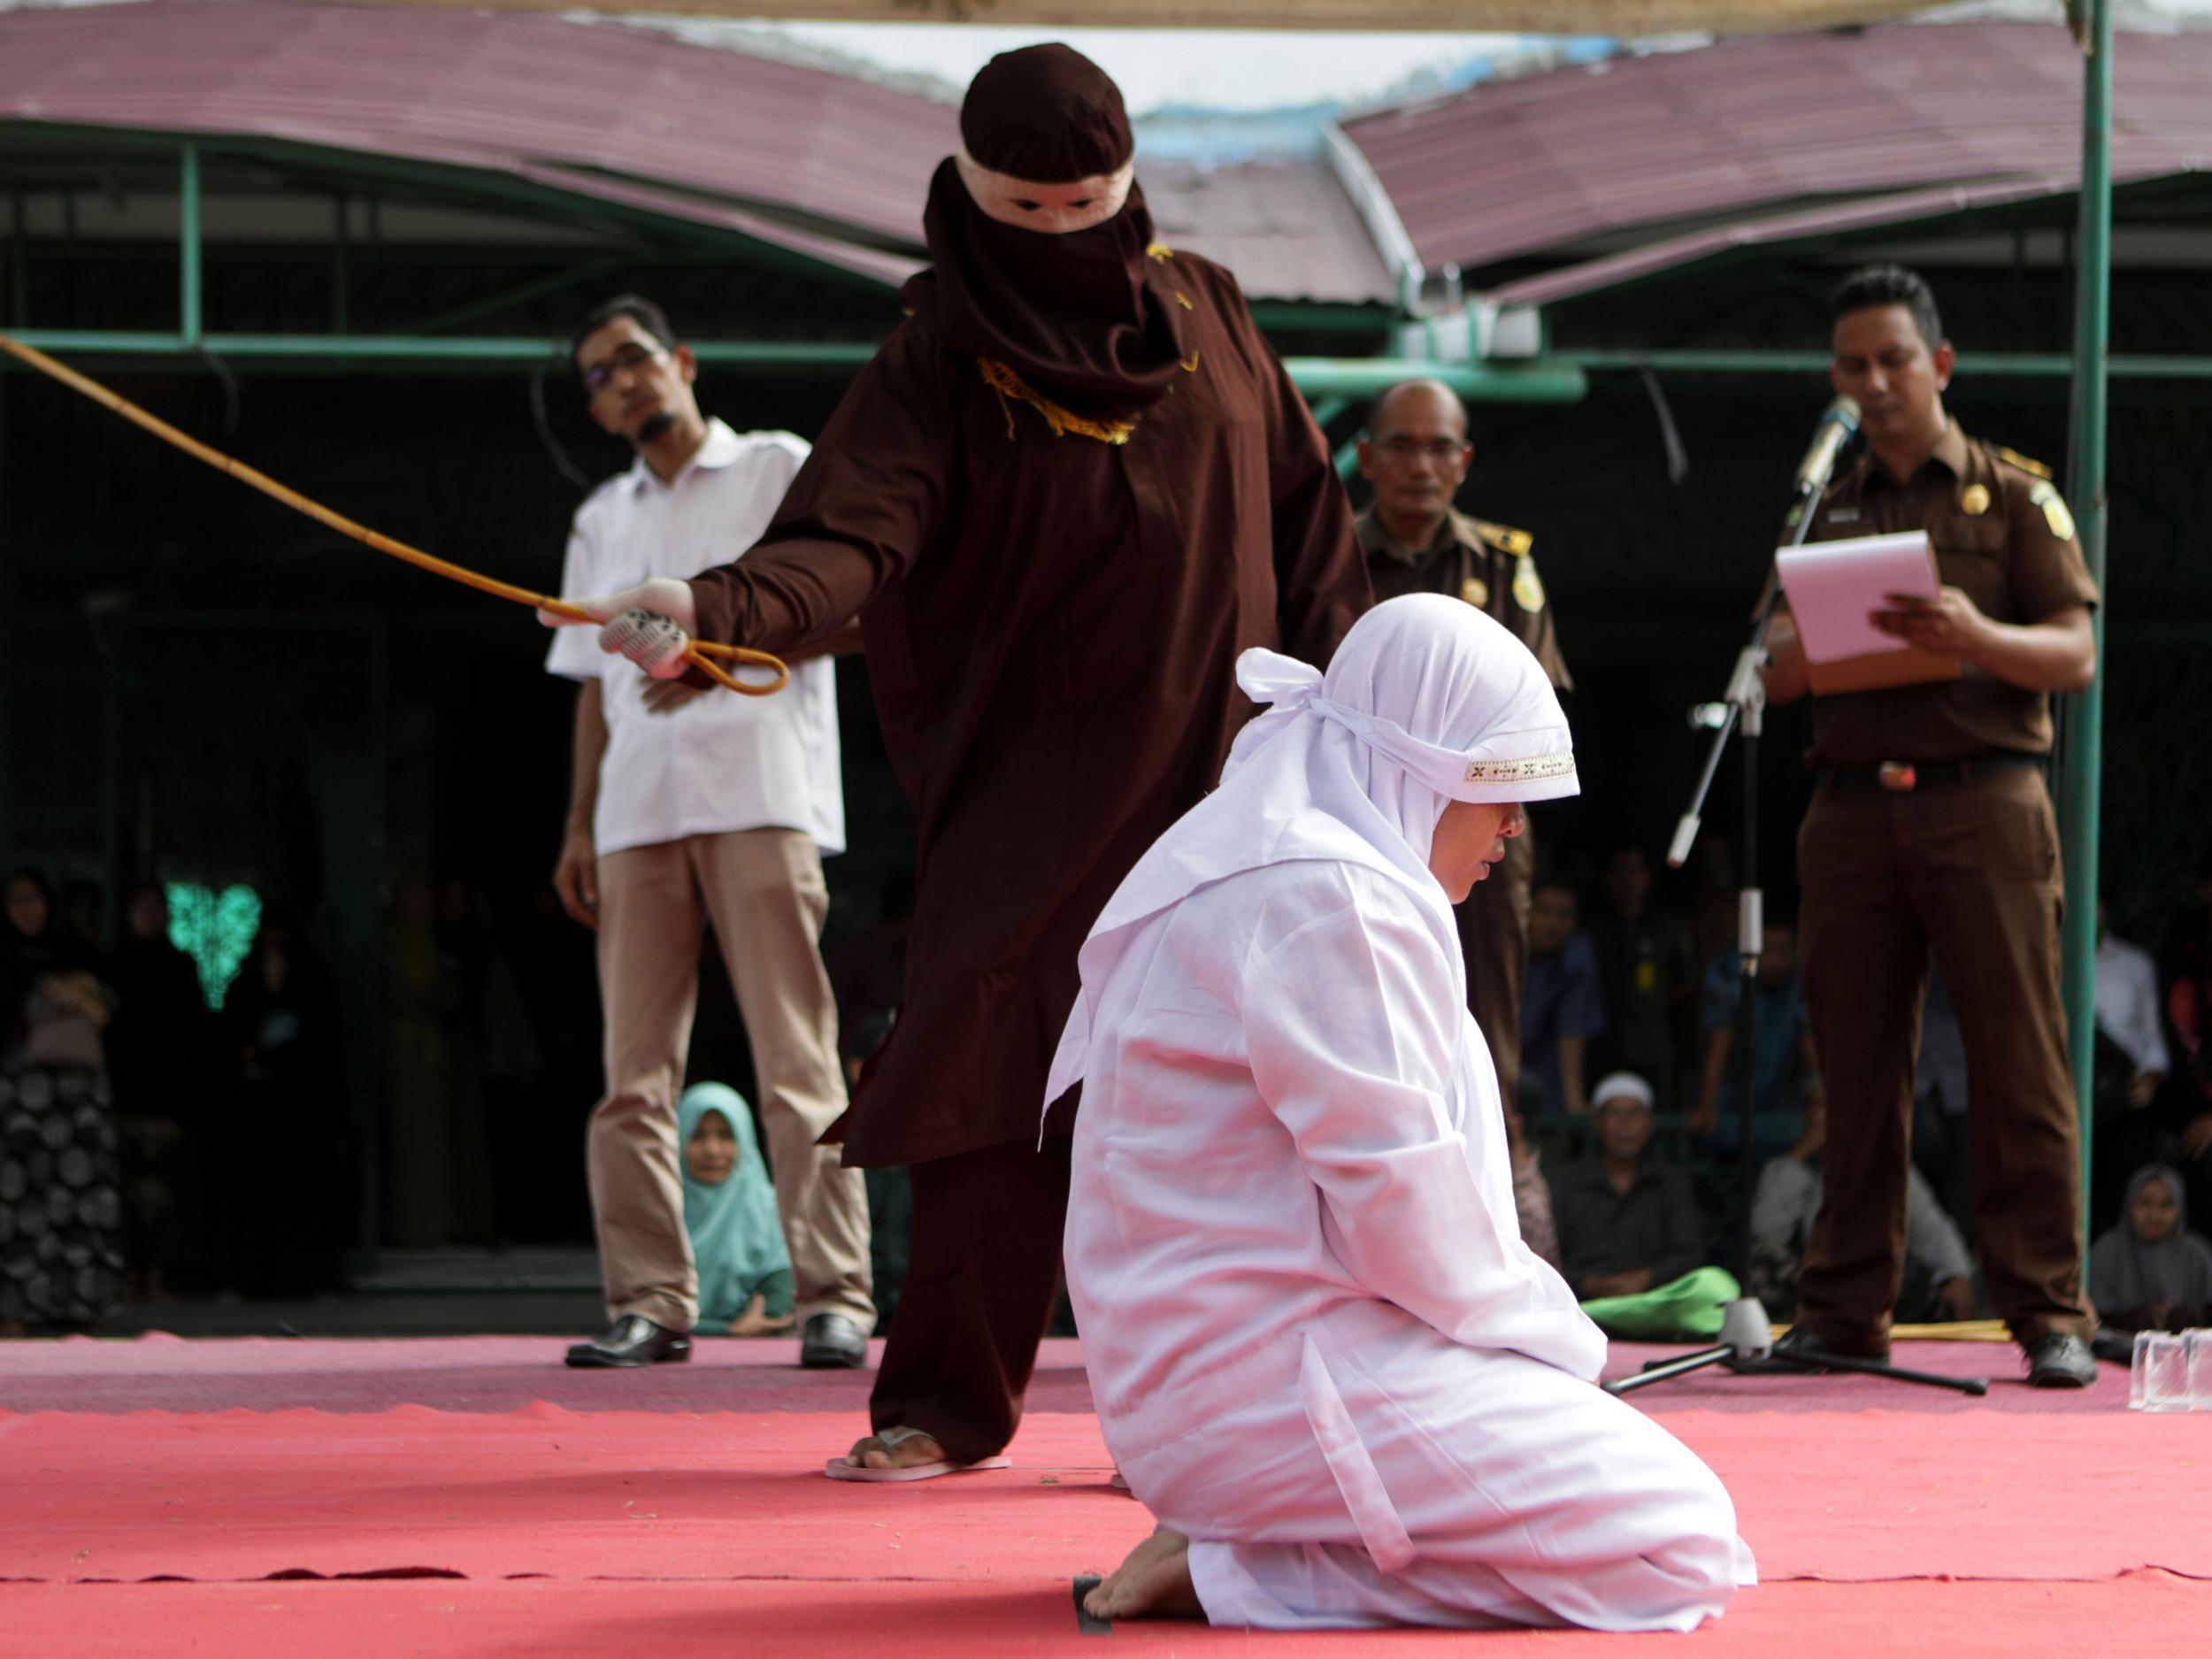 Indonesian woman lashed 100 times for being in presence of man she was not married to The Independent The Independent picture